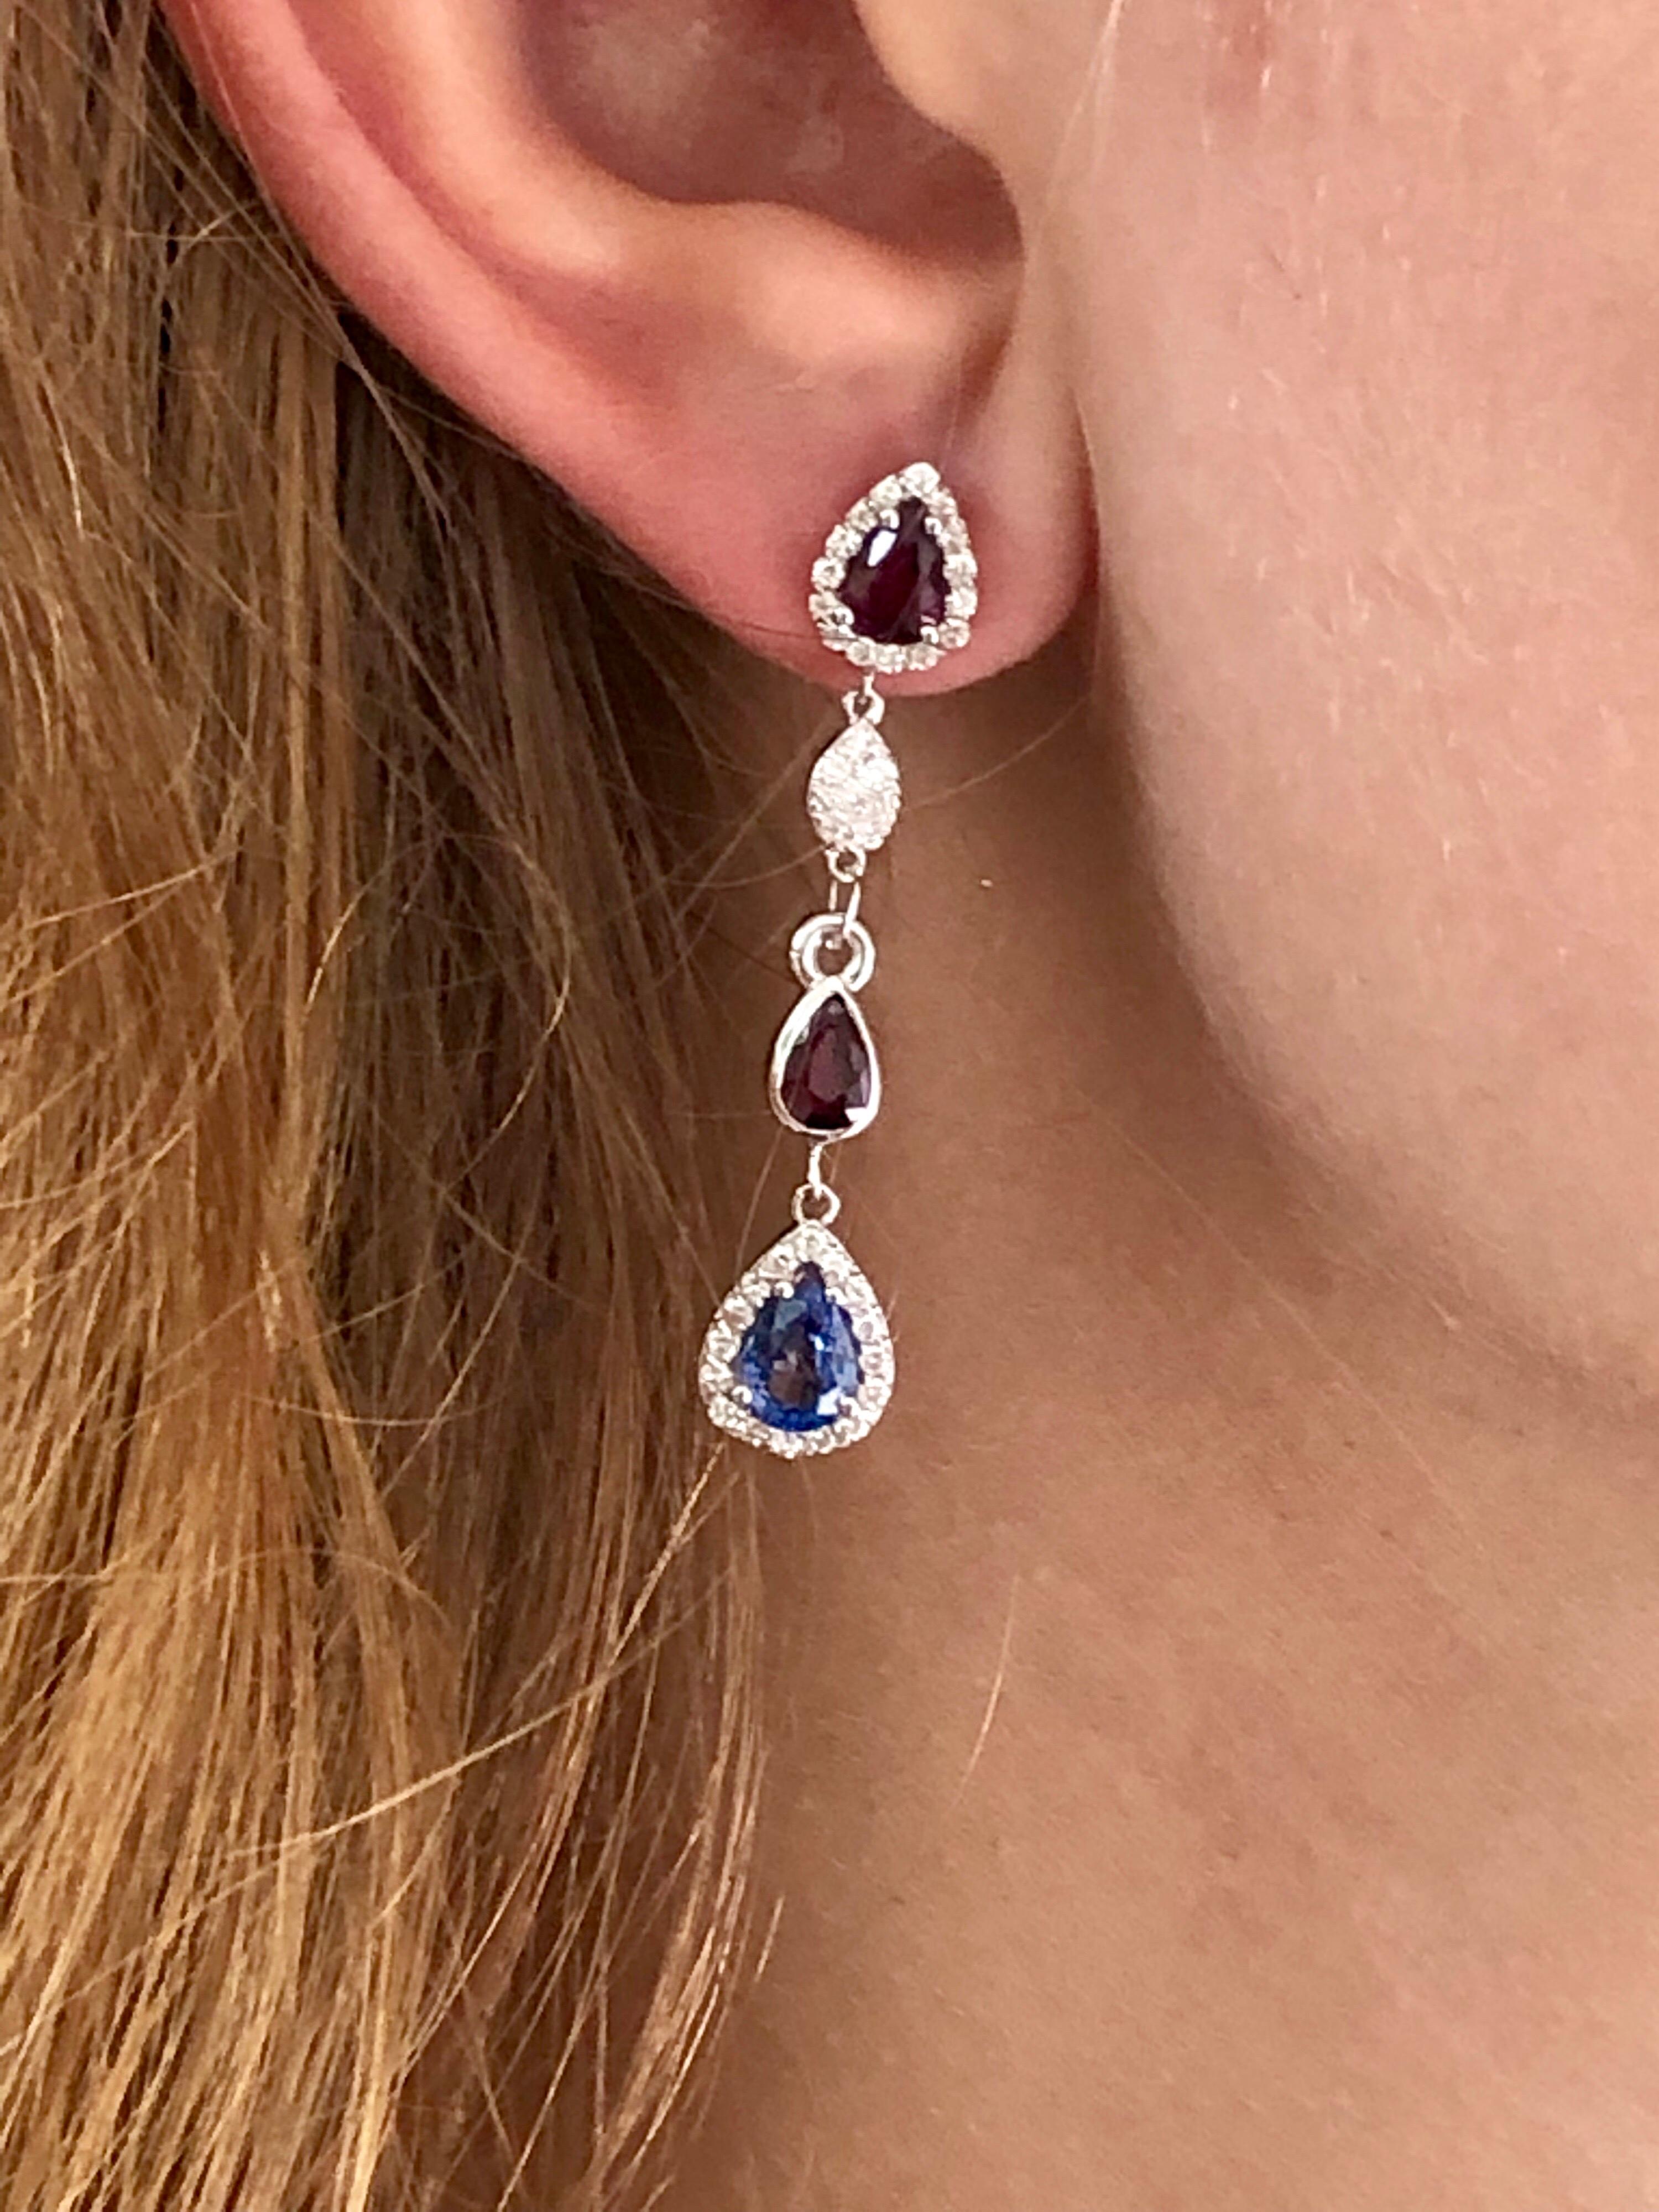 Pear Cut Diamond Earrings with Ruby and Sapphire Drops Weighing 4.96 Carat 